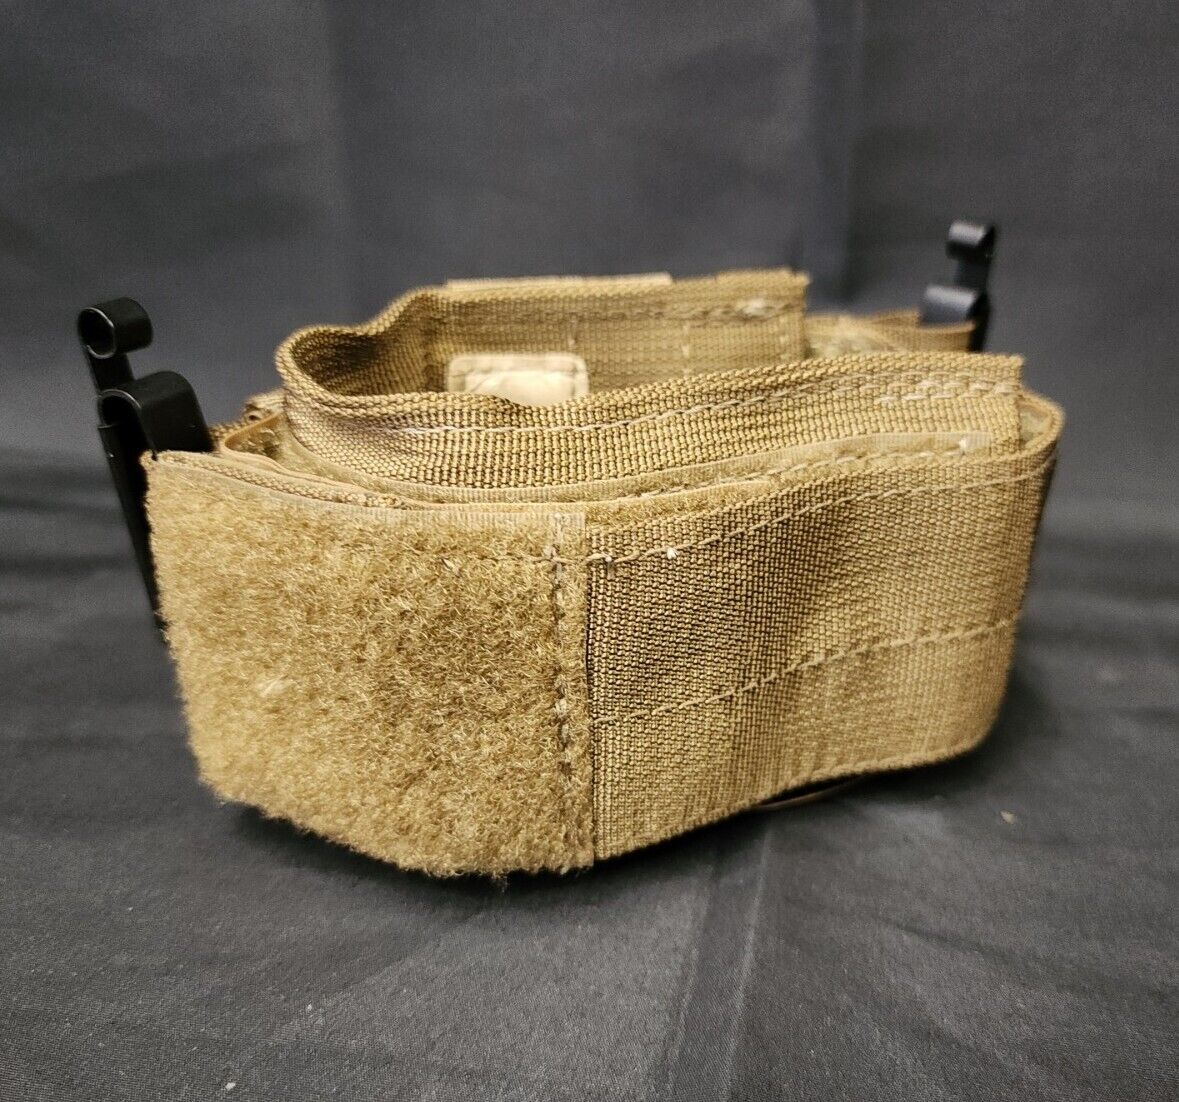 Pre-owned LBT Weapon Retention Device Coyote Cag Sof Devgru Seal